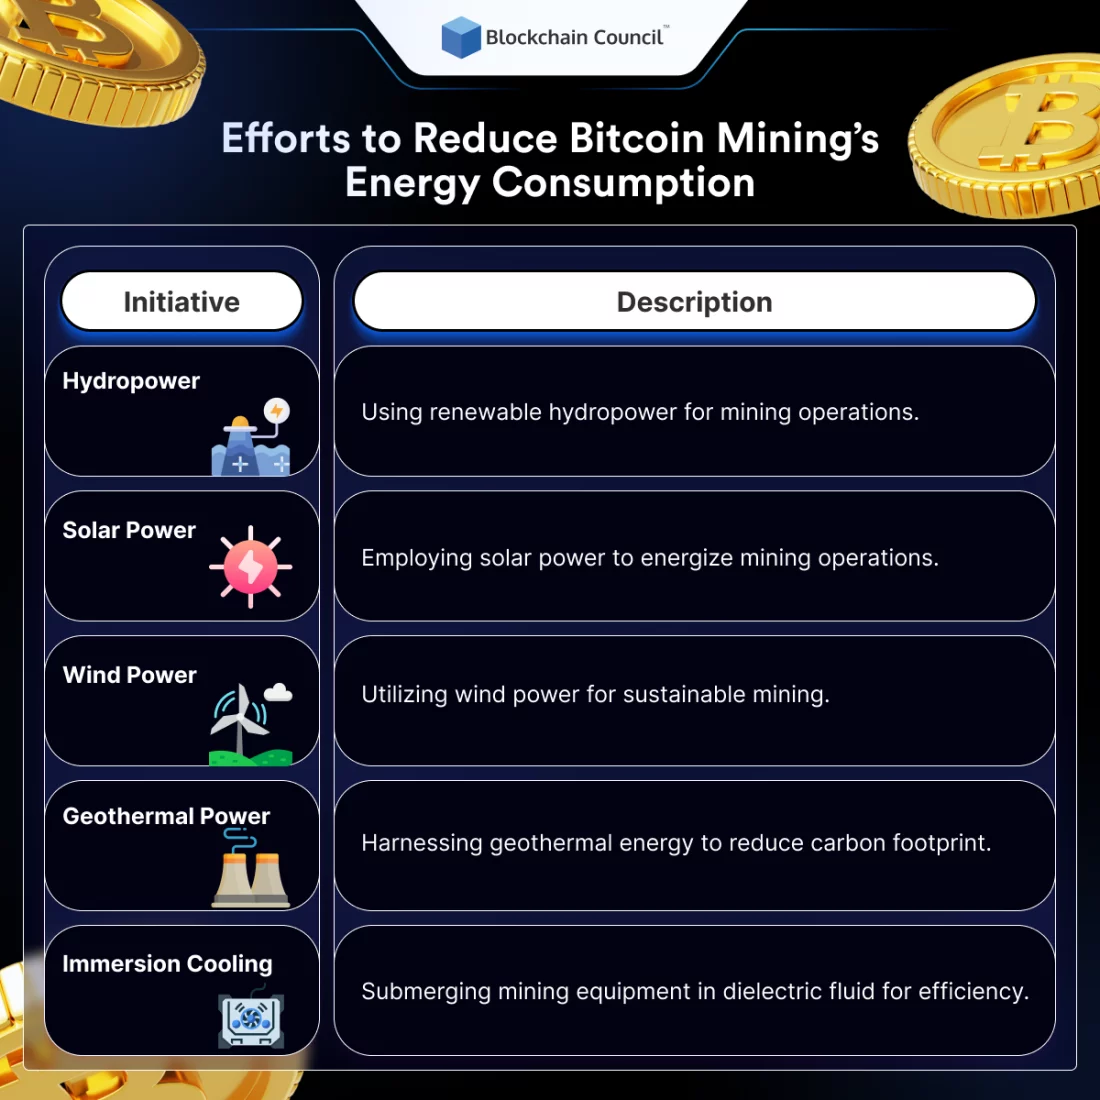 Efforts to Reduce Bitcoin Mining's Energy Consumption